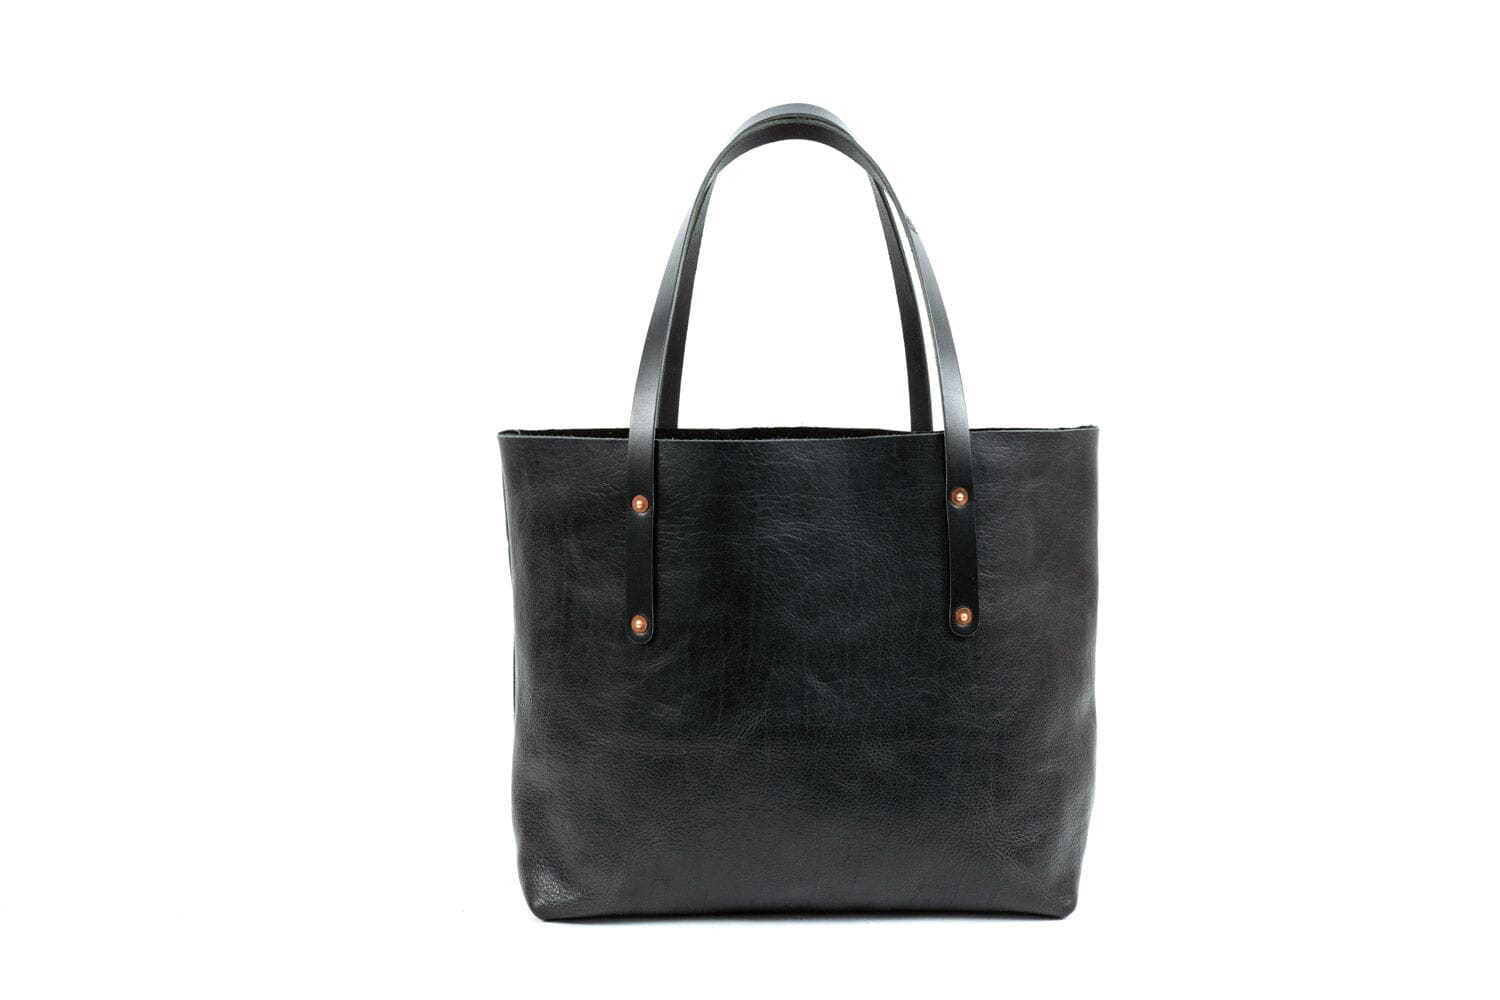 AVERY LEATHER TOTE BAG - LARGE - BLACK BISON (RTS)